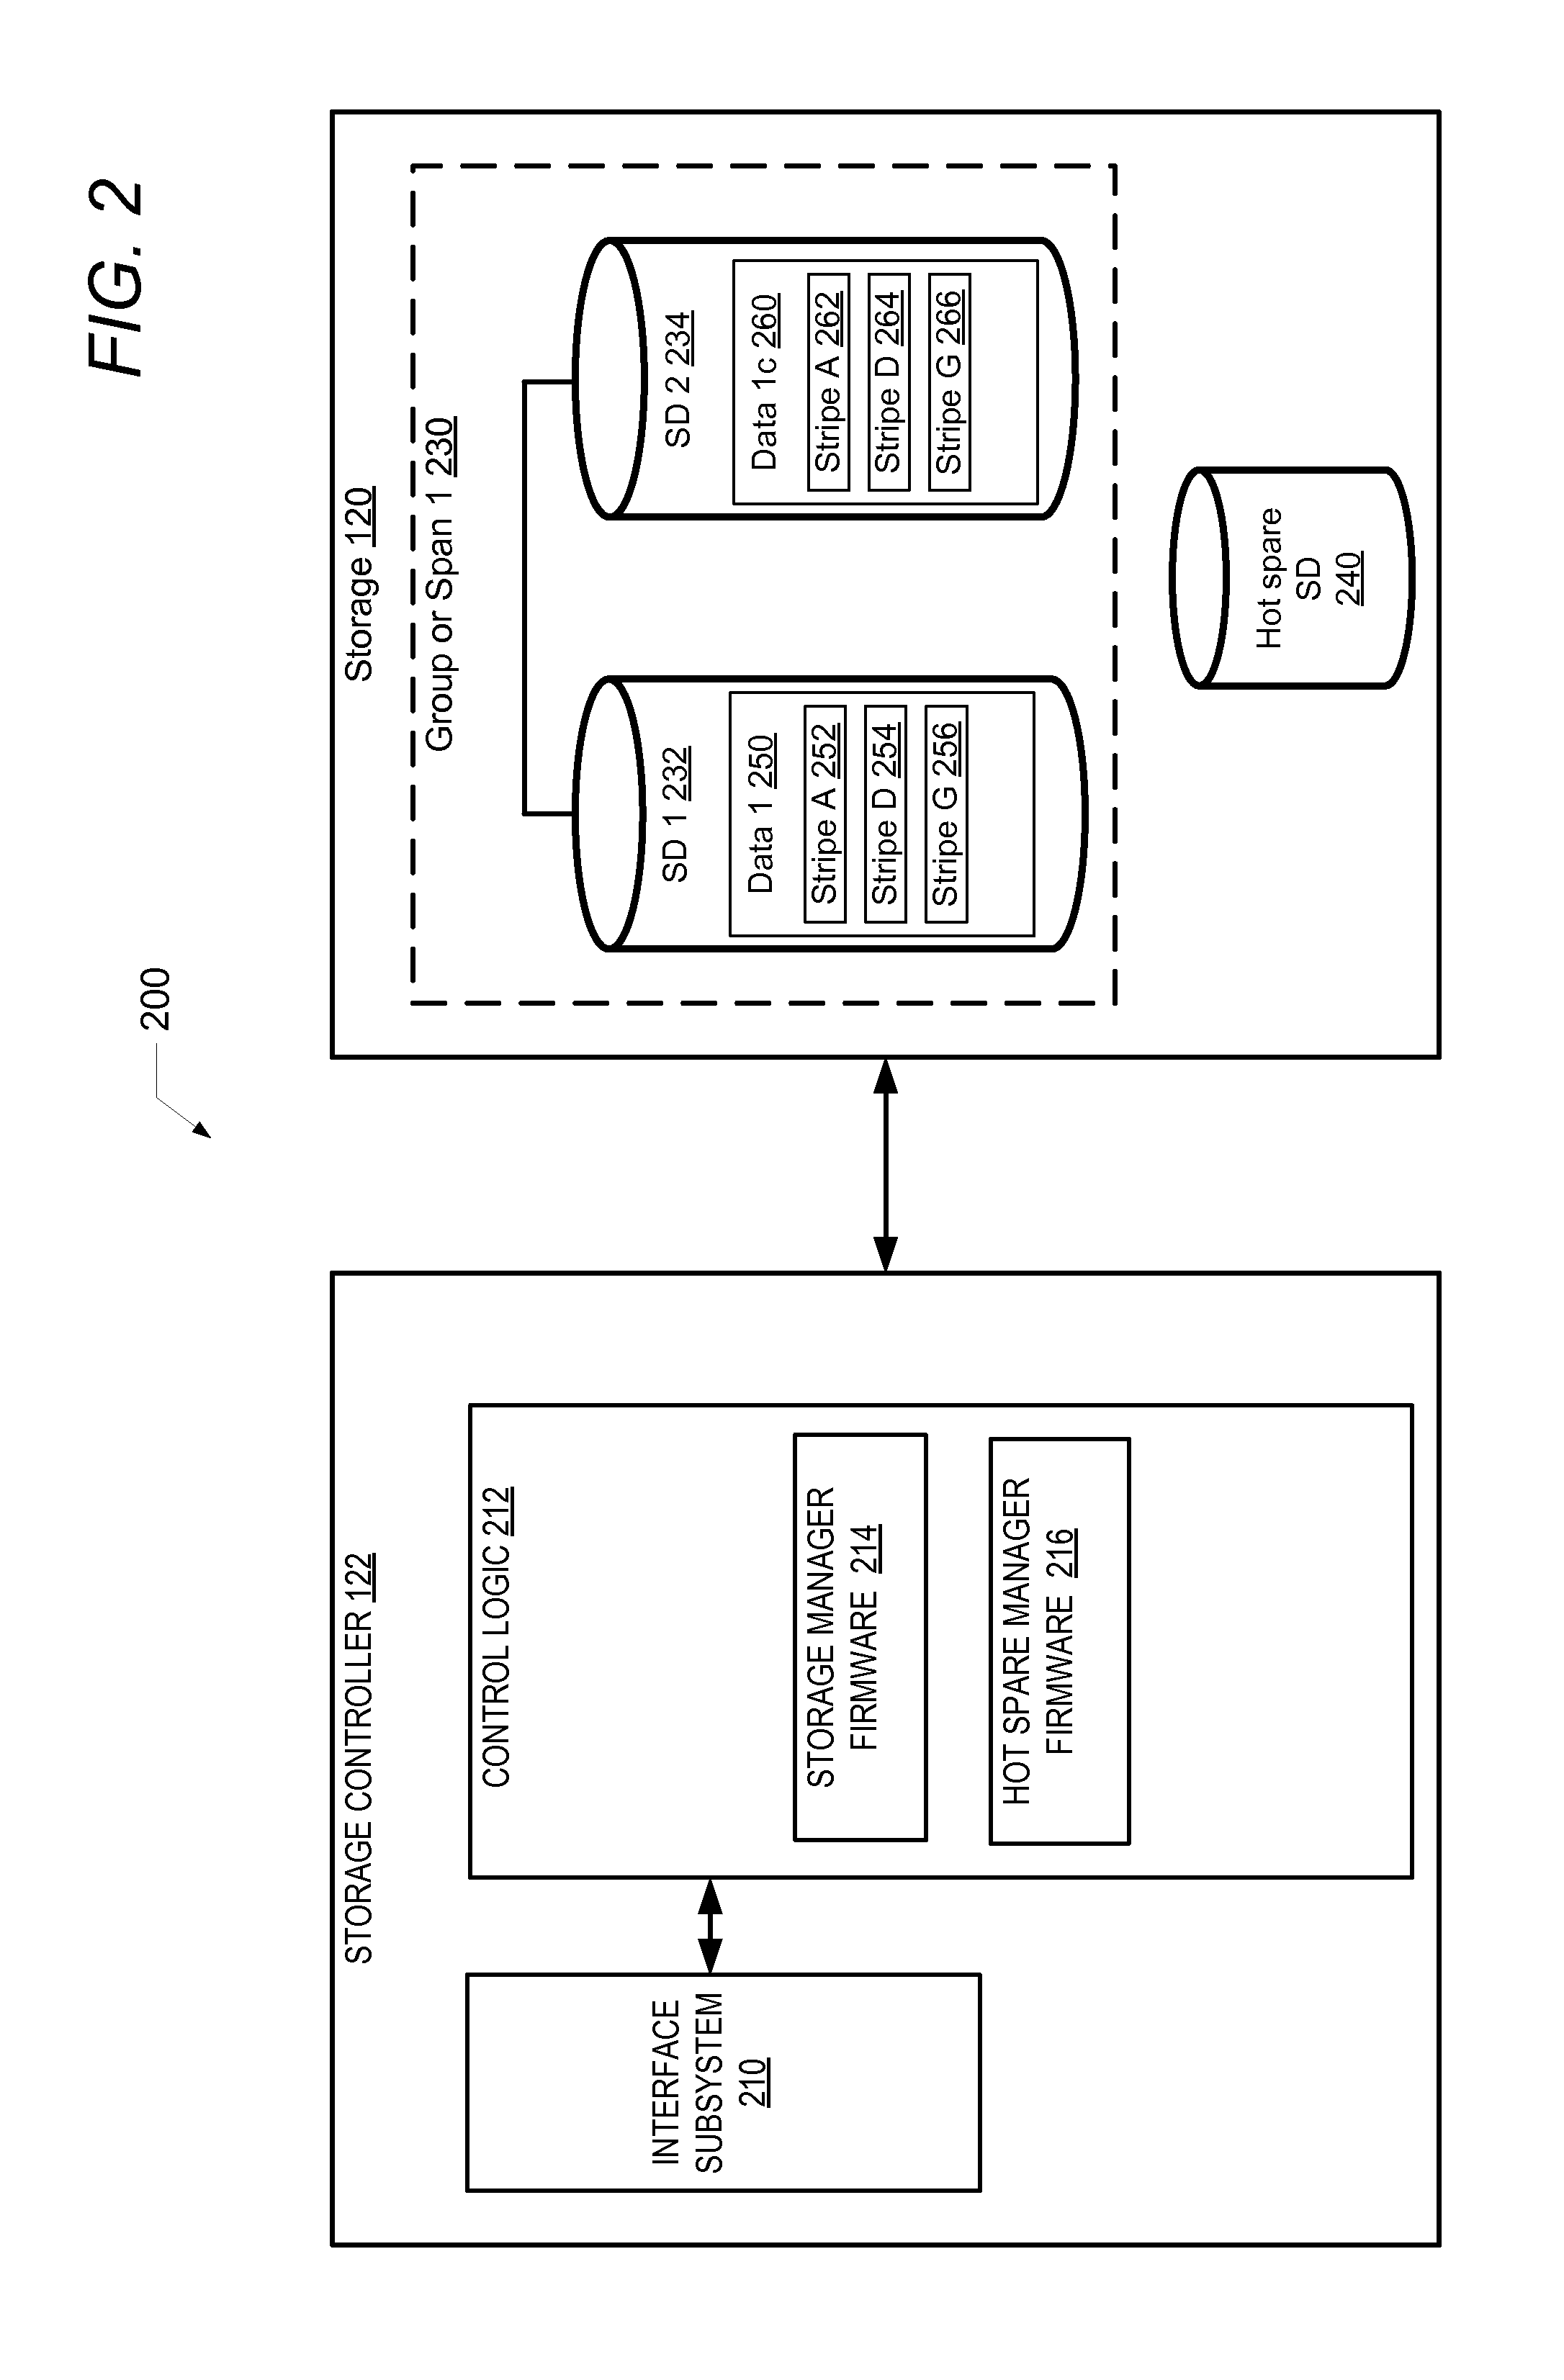 System and method for managing raid storage system having a hot spare drive